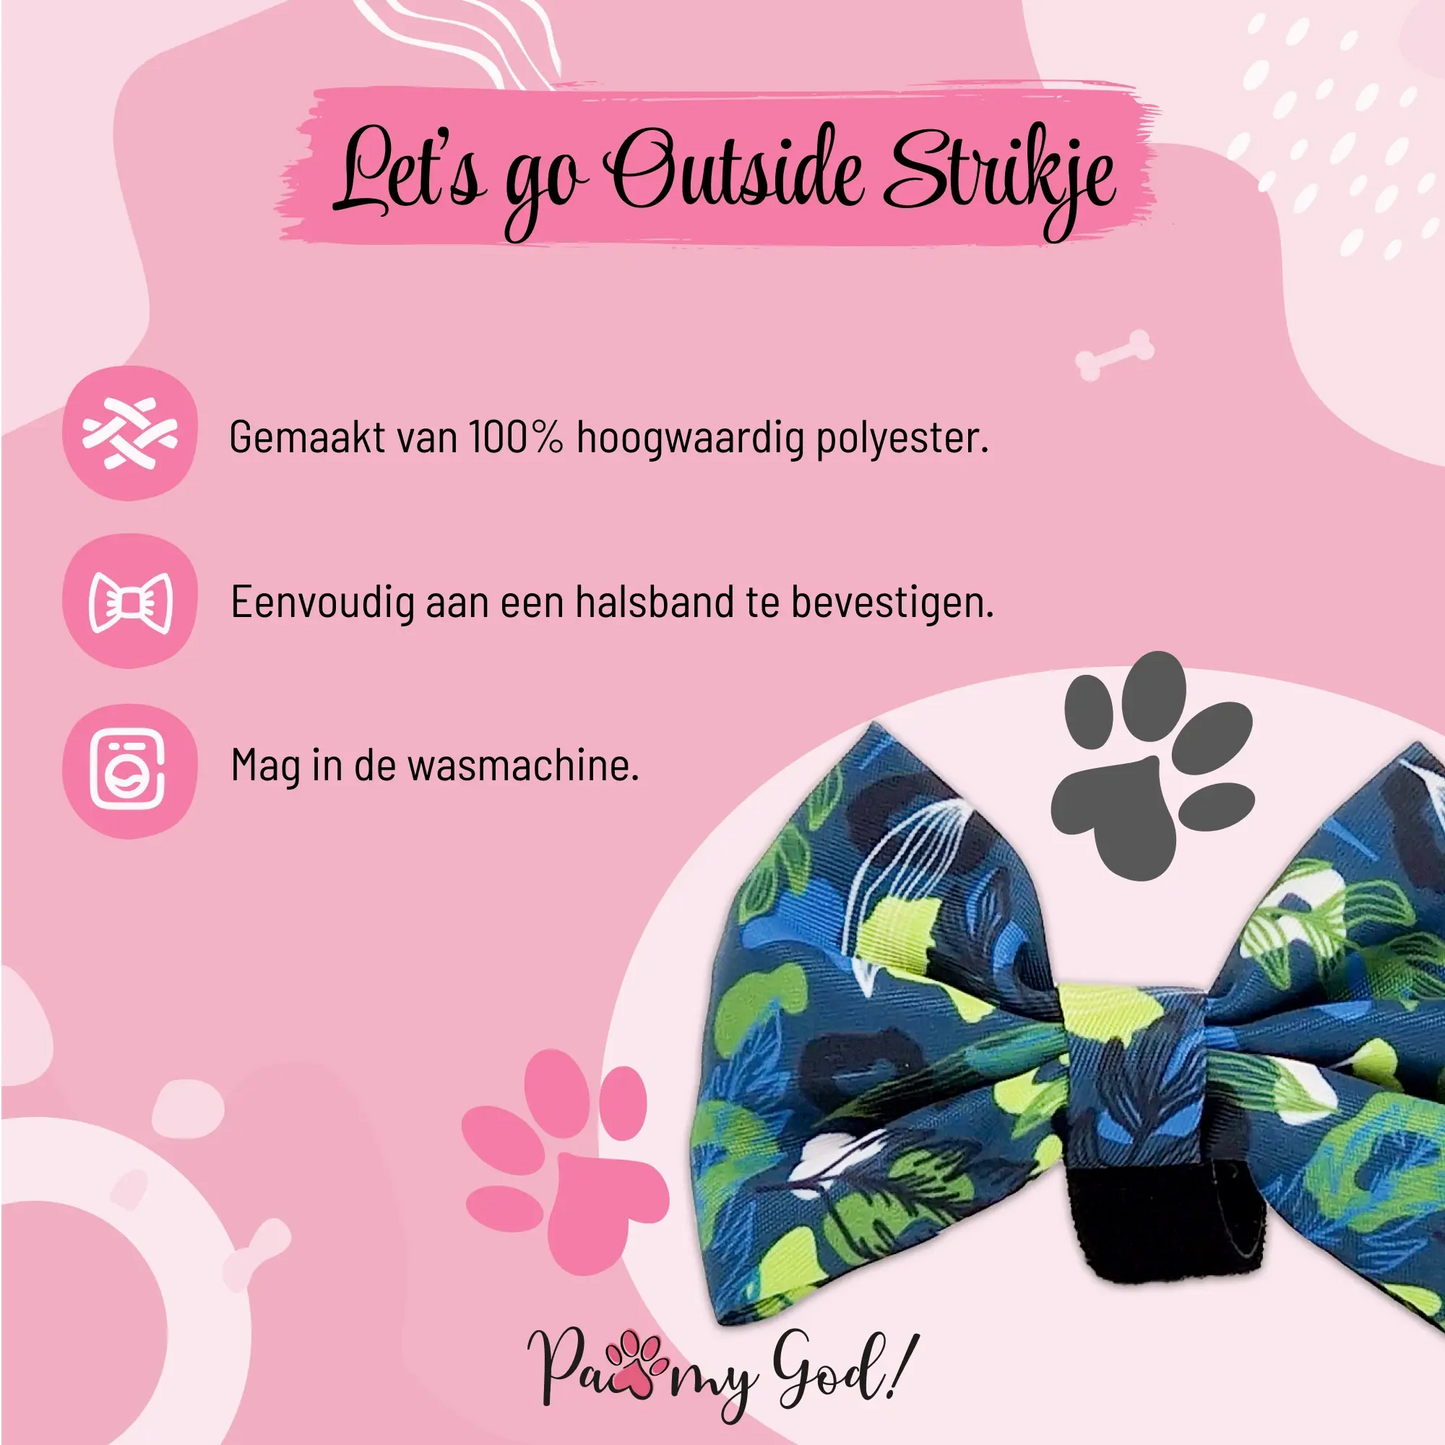 Let's go Outside Bow Tie Features